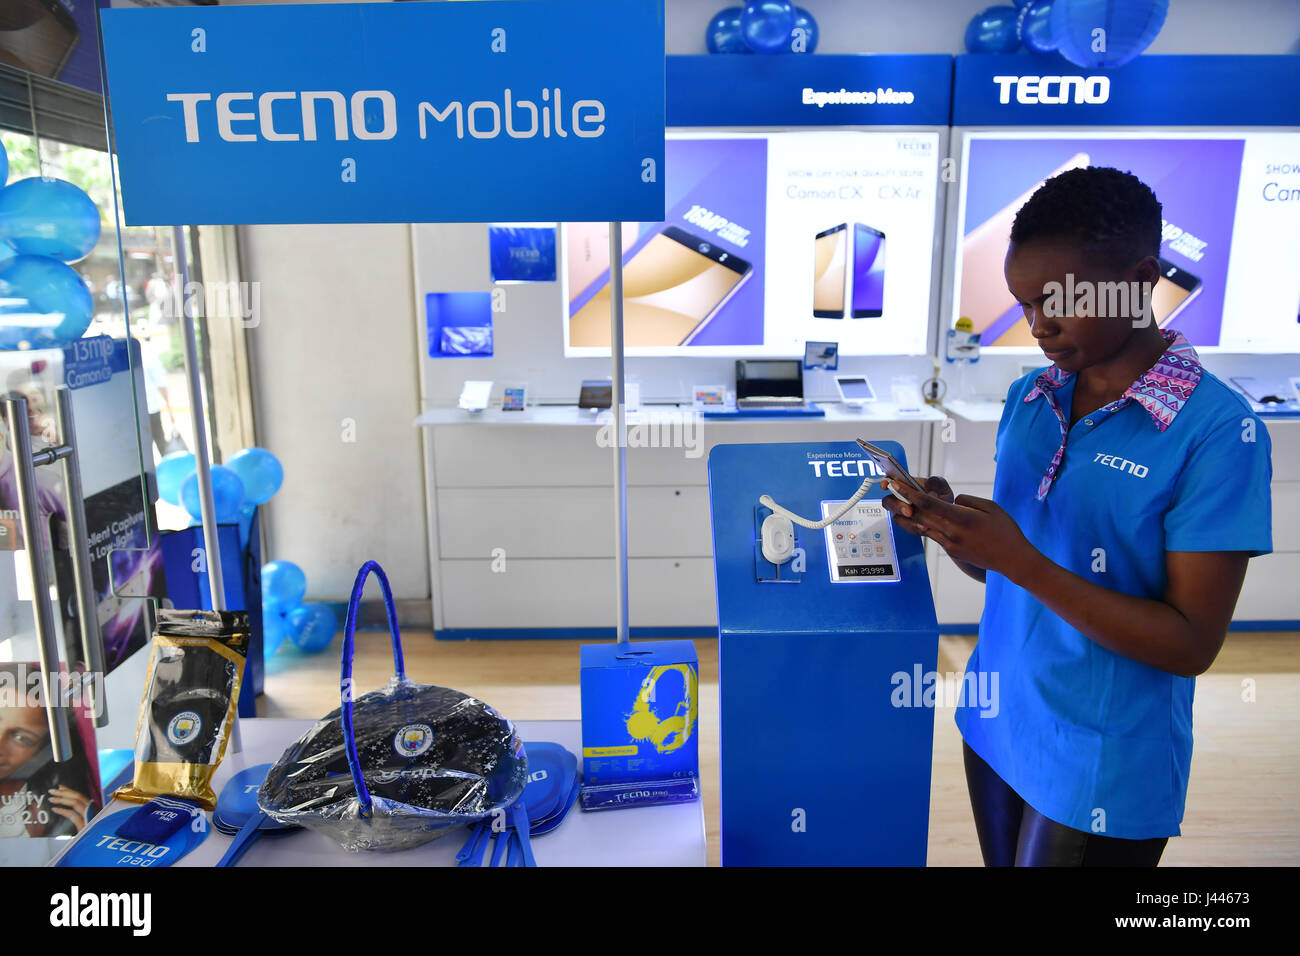 (170510) -- NAIROBI, May 10, 2017 (Xinhua) -- A staff waits for customers at a mobile phone shop in downtown Nairobi, capital of Kenya, on May 9, 2017. Chinese mobile phone manufacturer Tecno Mobile sales reached 25 million devices, including 9 million smartphones in 2015, helping it to sustain the most 'popular ' brand status in Africa. (Xinhua/Sun Ruibo) (jmmn) Stock Photo